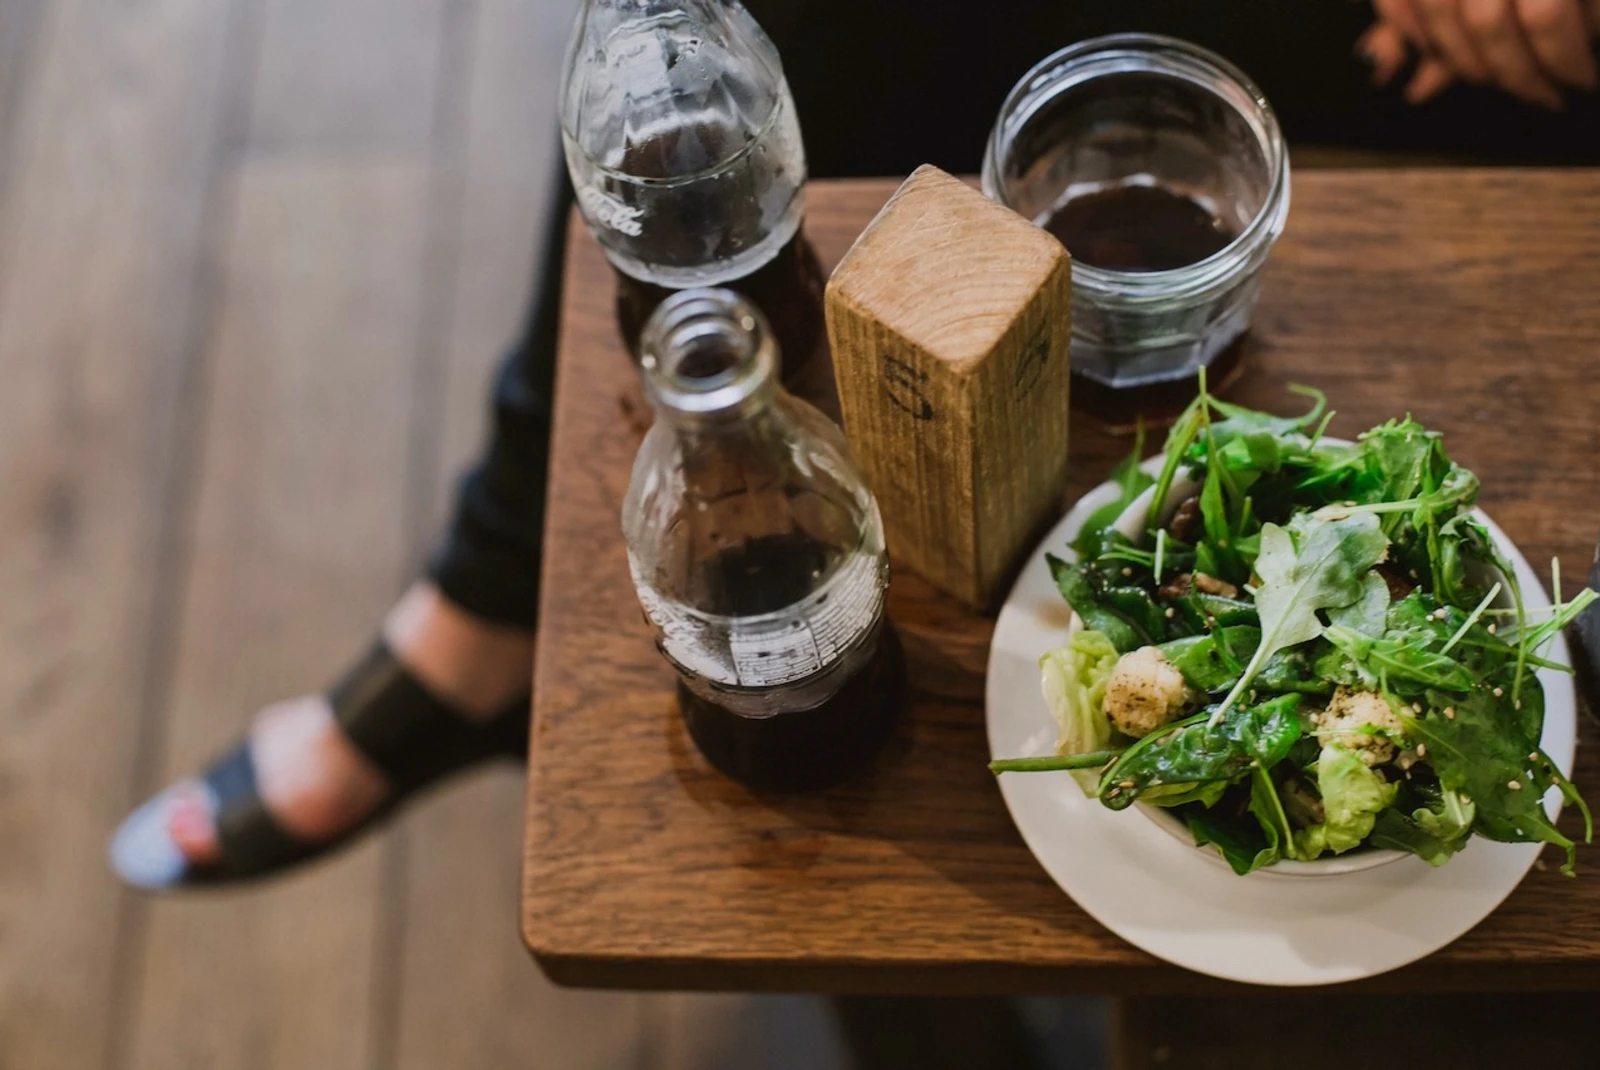 Aerial view of a green salad on a wooden table.